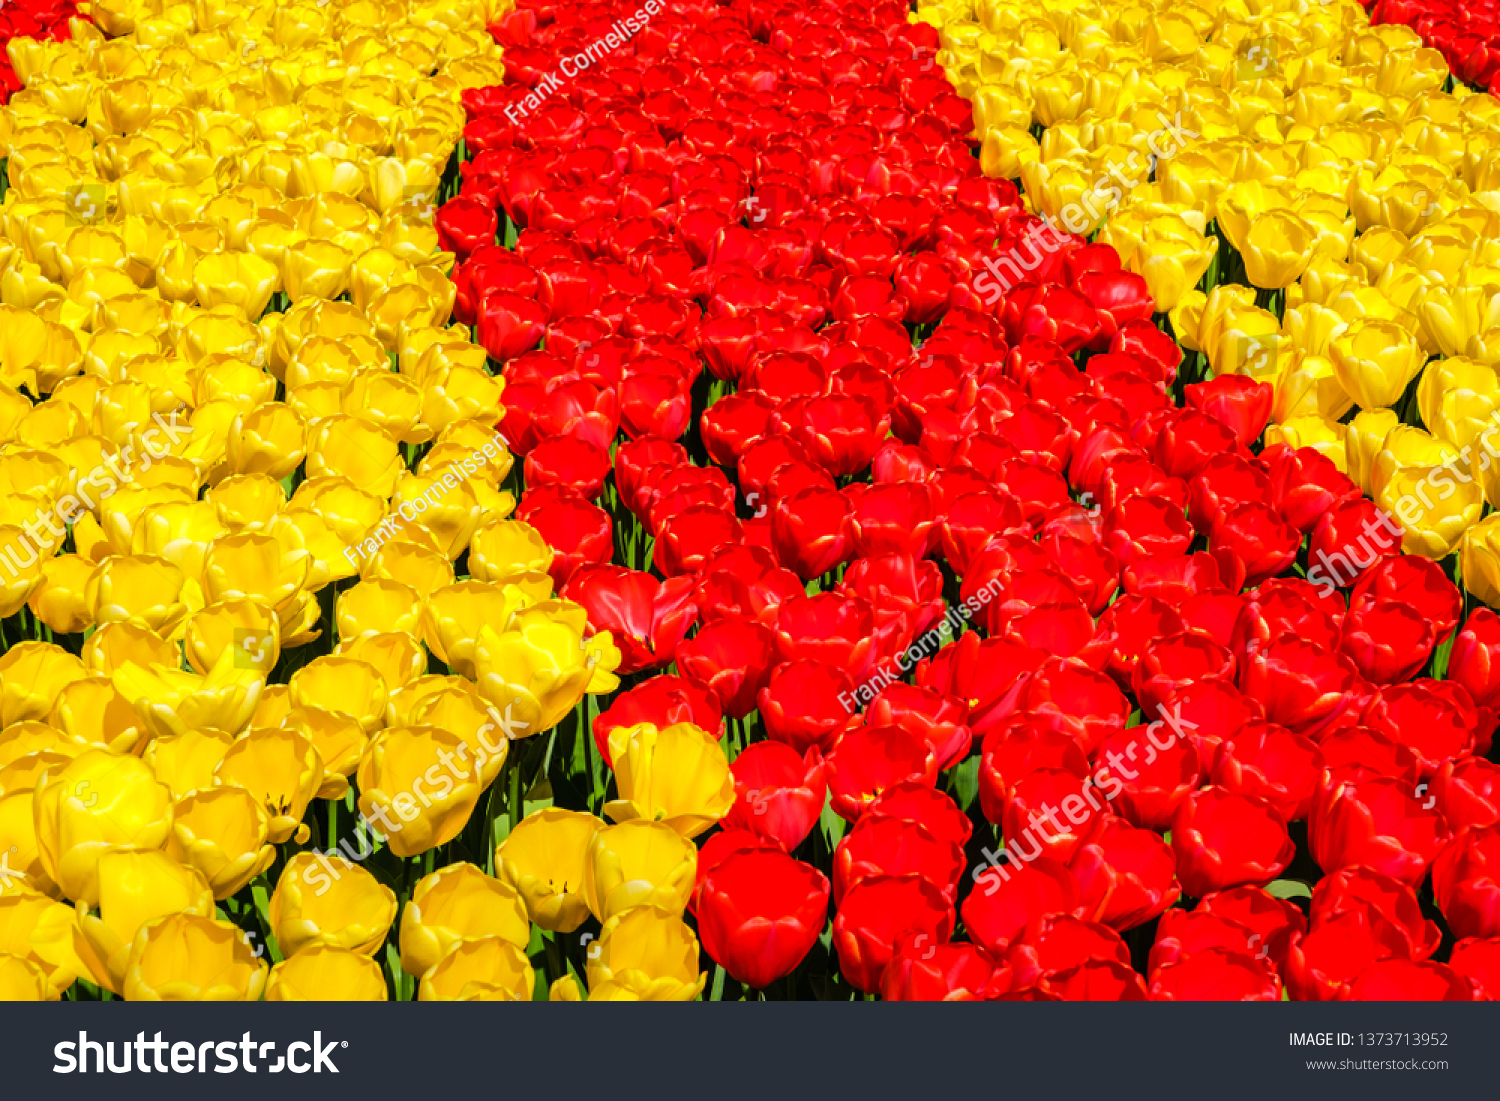 Rows of blooming brightly colored yellow and red tulips in bright sunlight in the spring. #1373713952